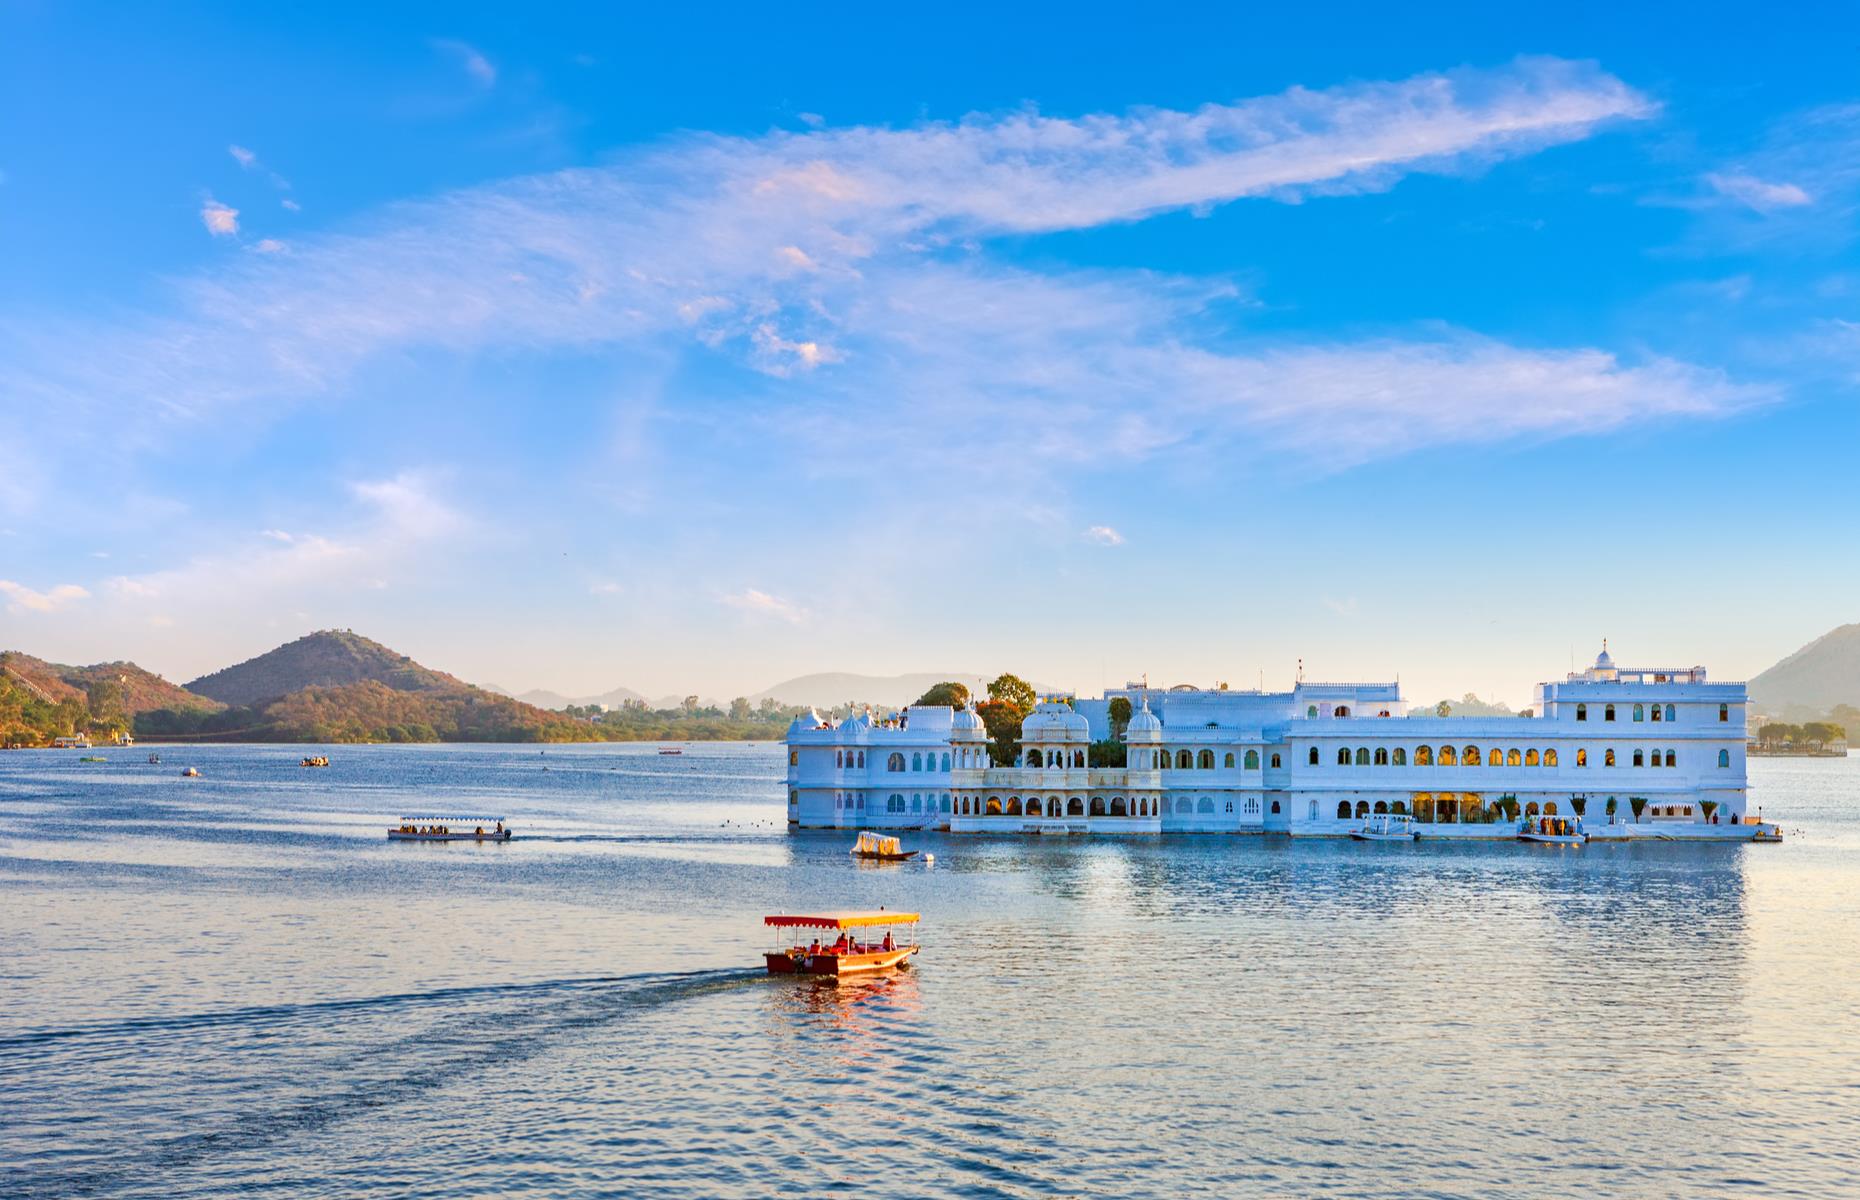 <p>The romantic palaces and dreamy waterways of Rajasthan’s ravishing city Udaipur have long captured travelers' and artists’ imaginations. It mesmerized viewers in <em>Octopussy</em> when its Lake Palace, one-time summer residence of the city's rulers, appeared as the opulent home of the movie’s eponymous wealthy businesswoman. The floating 18th-century palace, which is set on an island in Lake Pichola, is <a href="https://www.tajhotels.com/en-in/taj/taj-lake-palace-udaipur/">now part of the luxury Taj Hotel Group</a>. The old laneways of the so-called Venice of the East also featured extensively in the 1983 movie.</p>